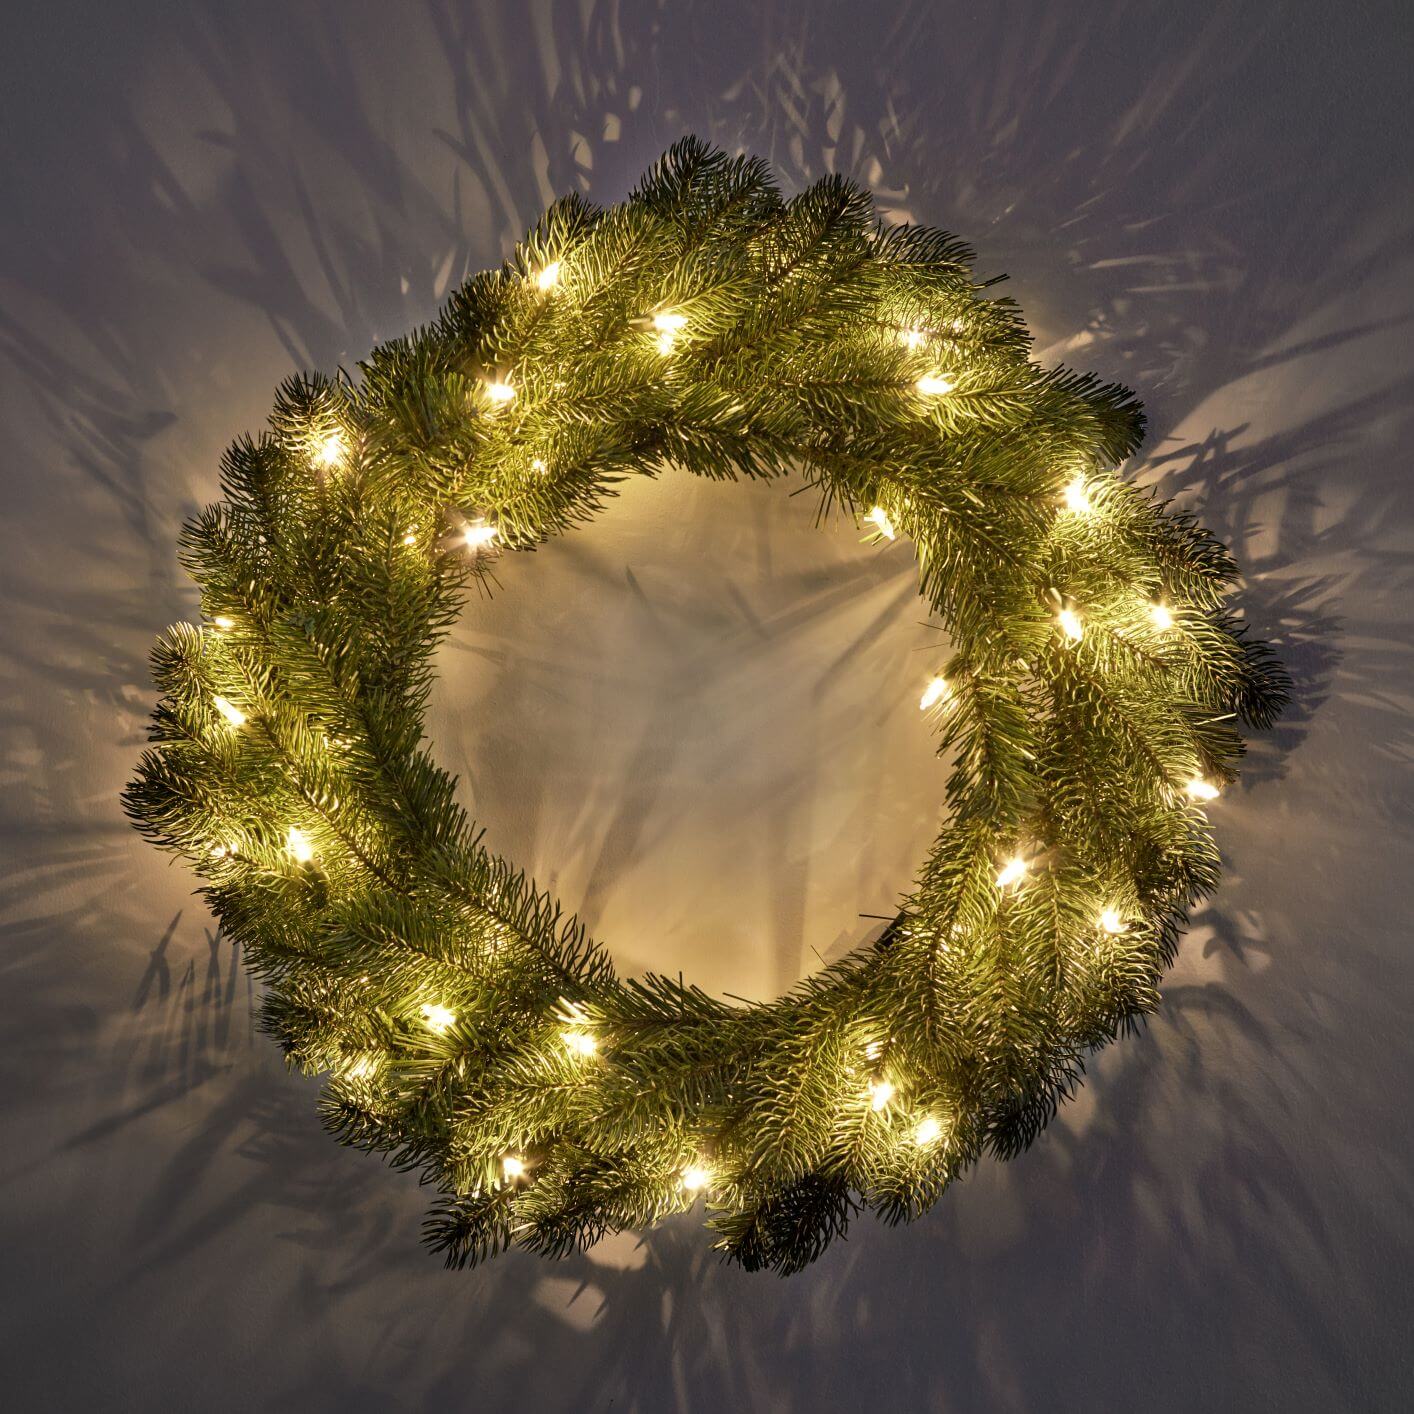 King of Christmas 24" King Douglas Fir Wreath with Warm White LED Lights (Battery Operated)